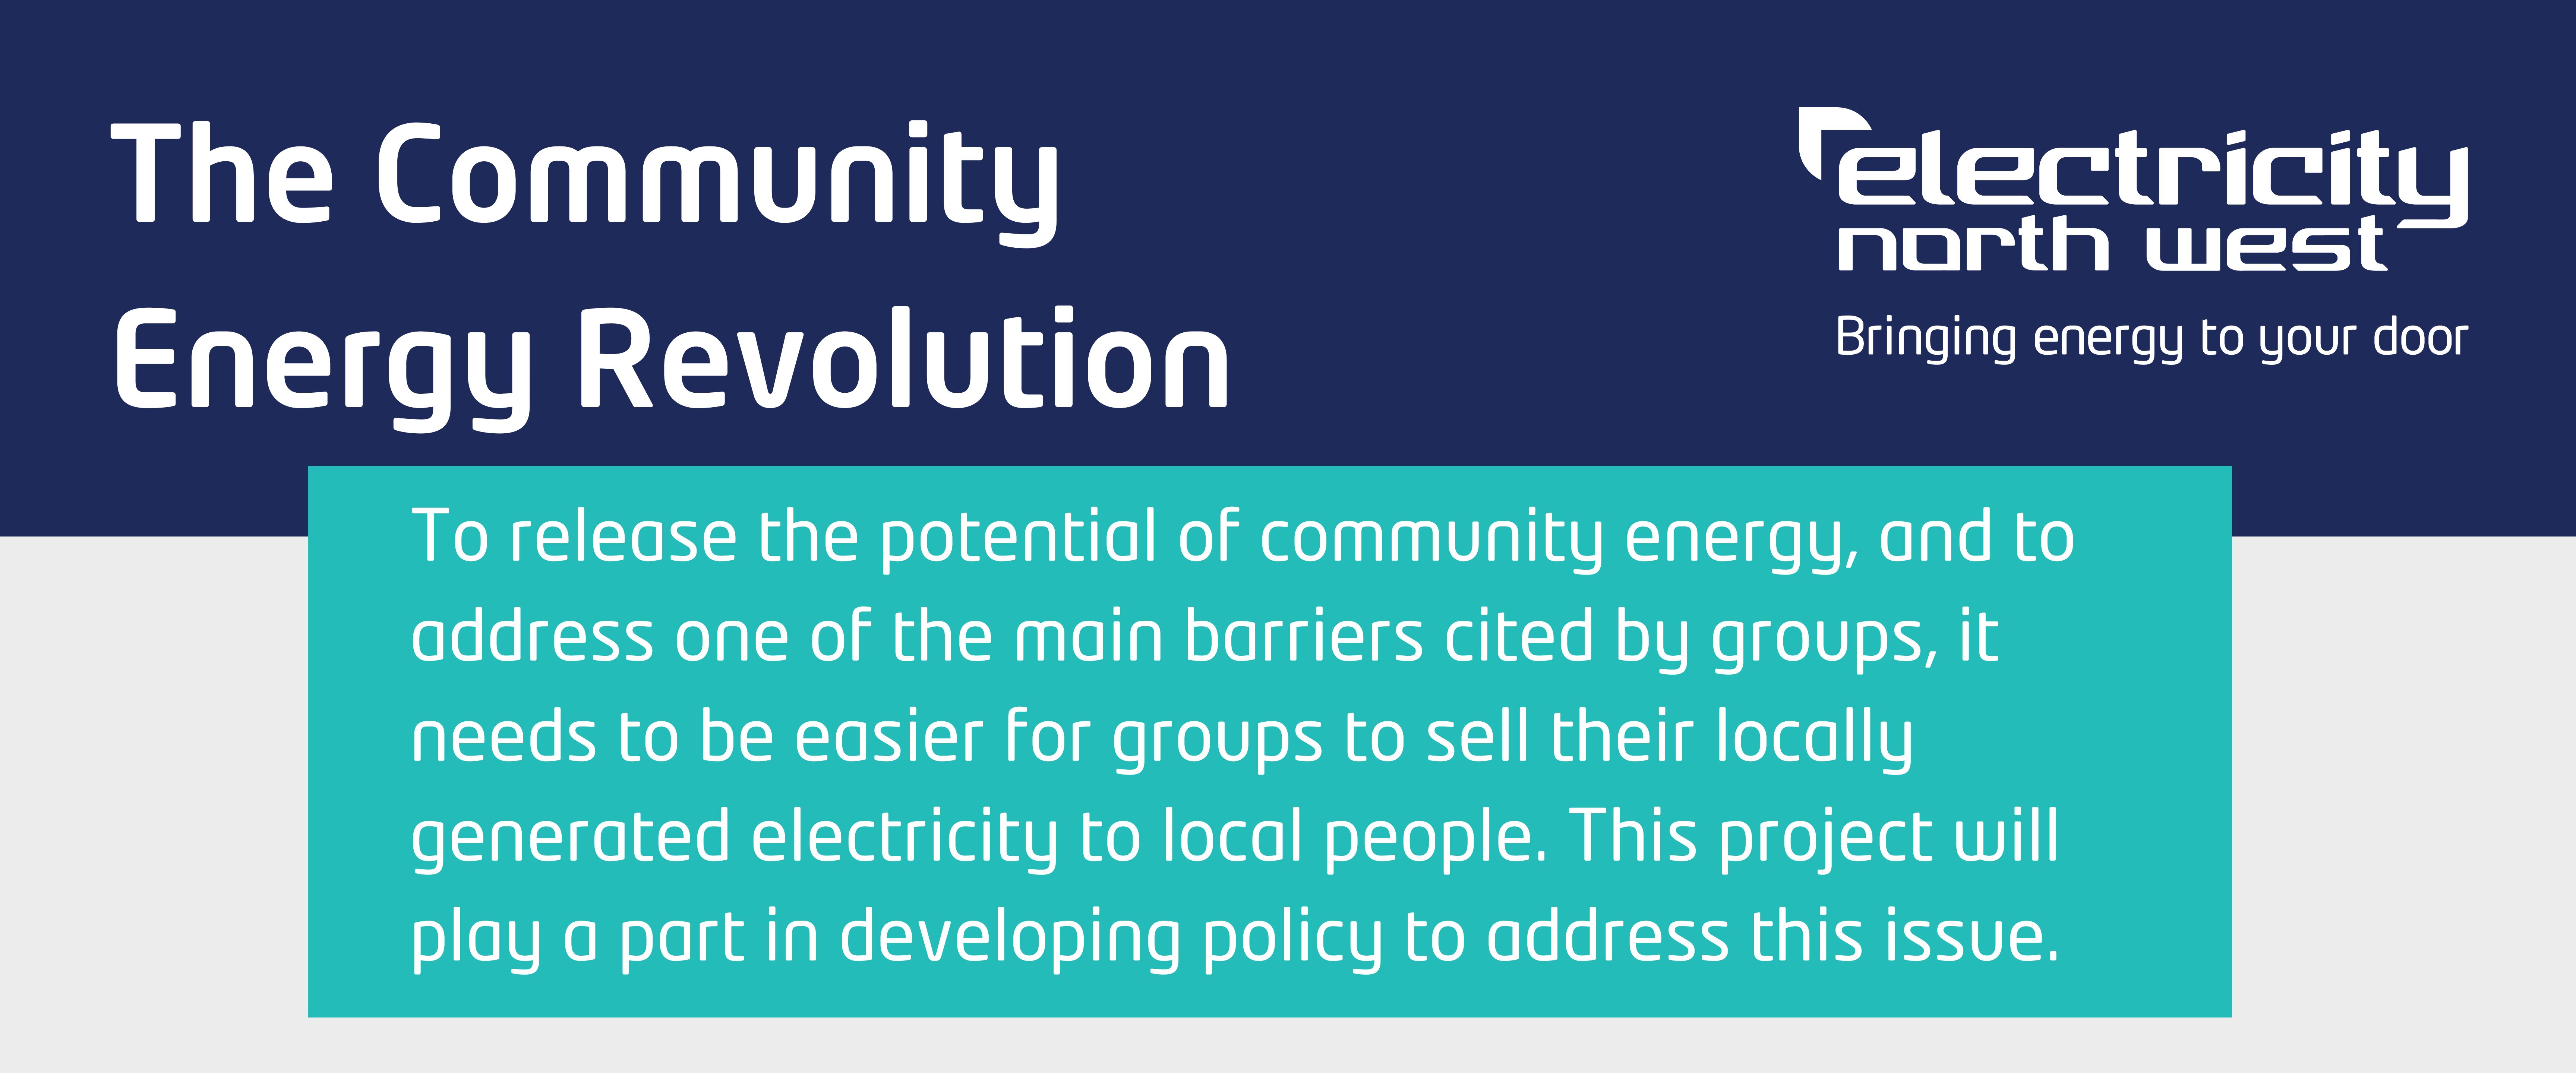 The Community Energy Revolution, To release the potential of community energy, and to address one of the main barriers cited by groups, it needs to be easier for groups to sell their locally generated electricity to local people.  This project will play a part in developing policy to address this issue. 
